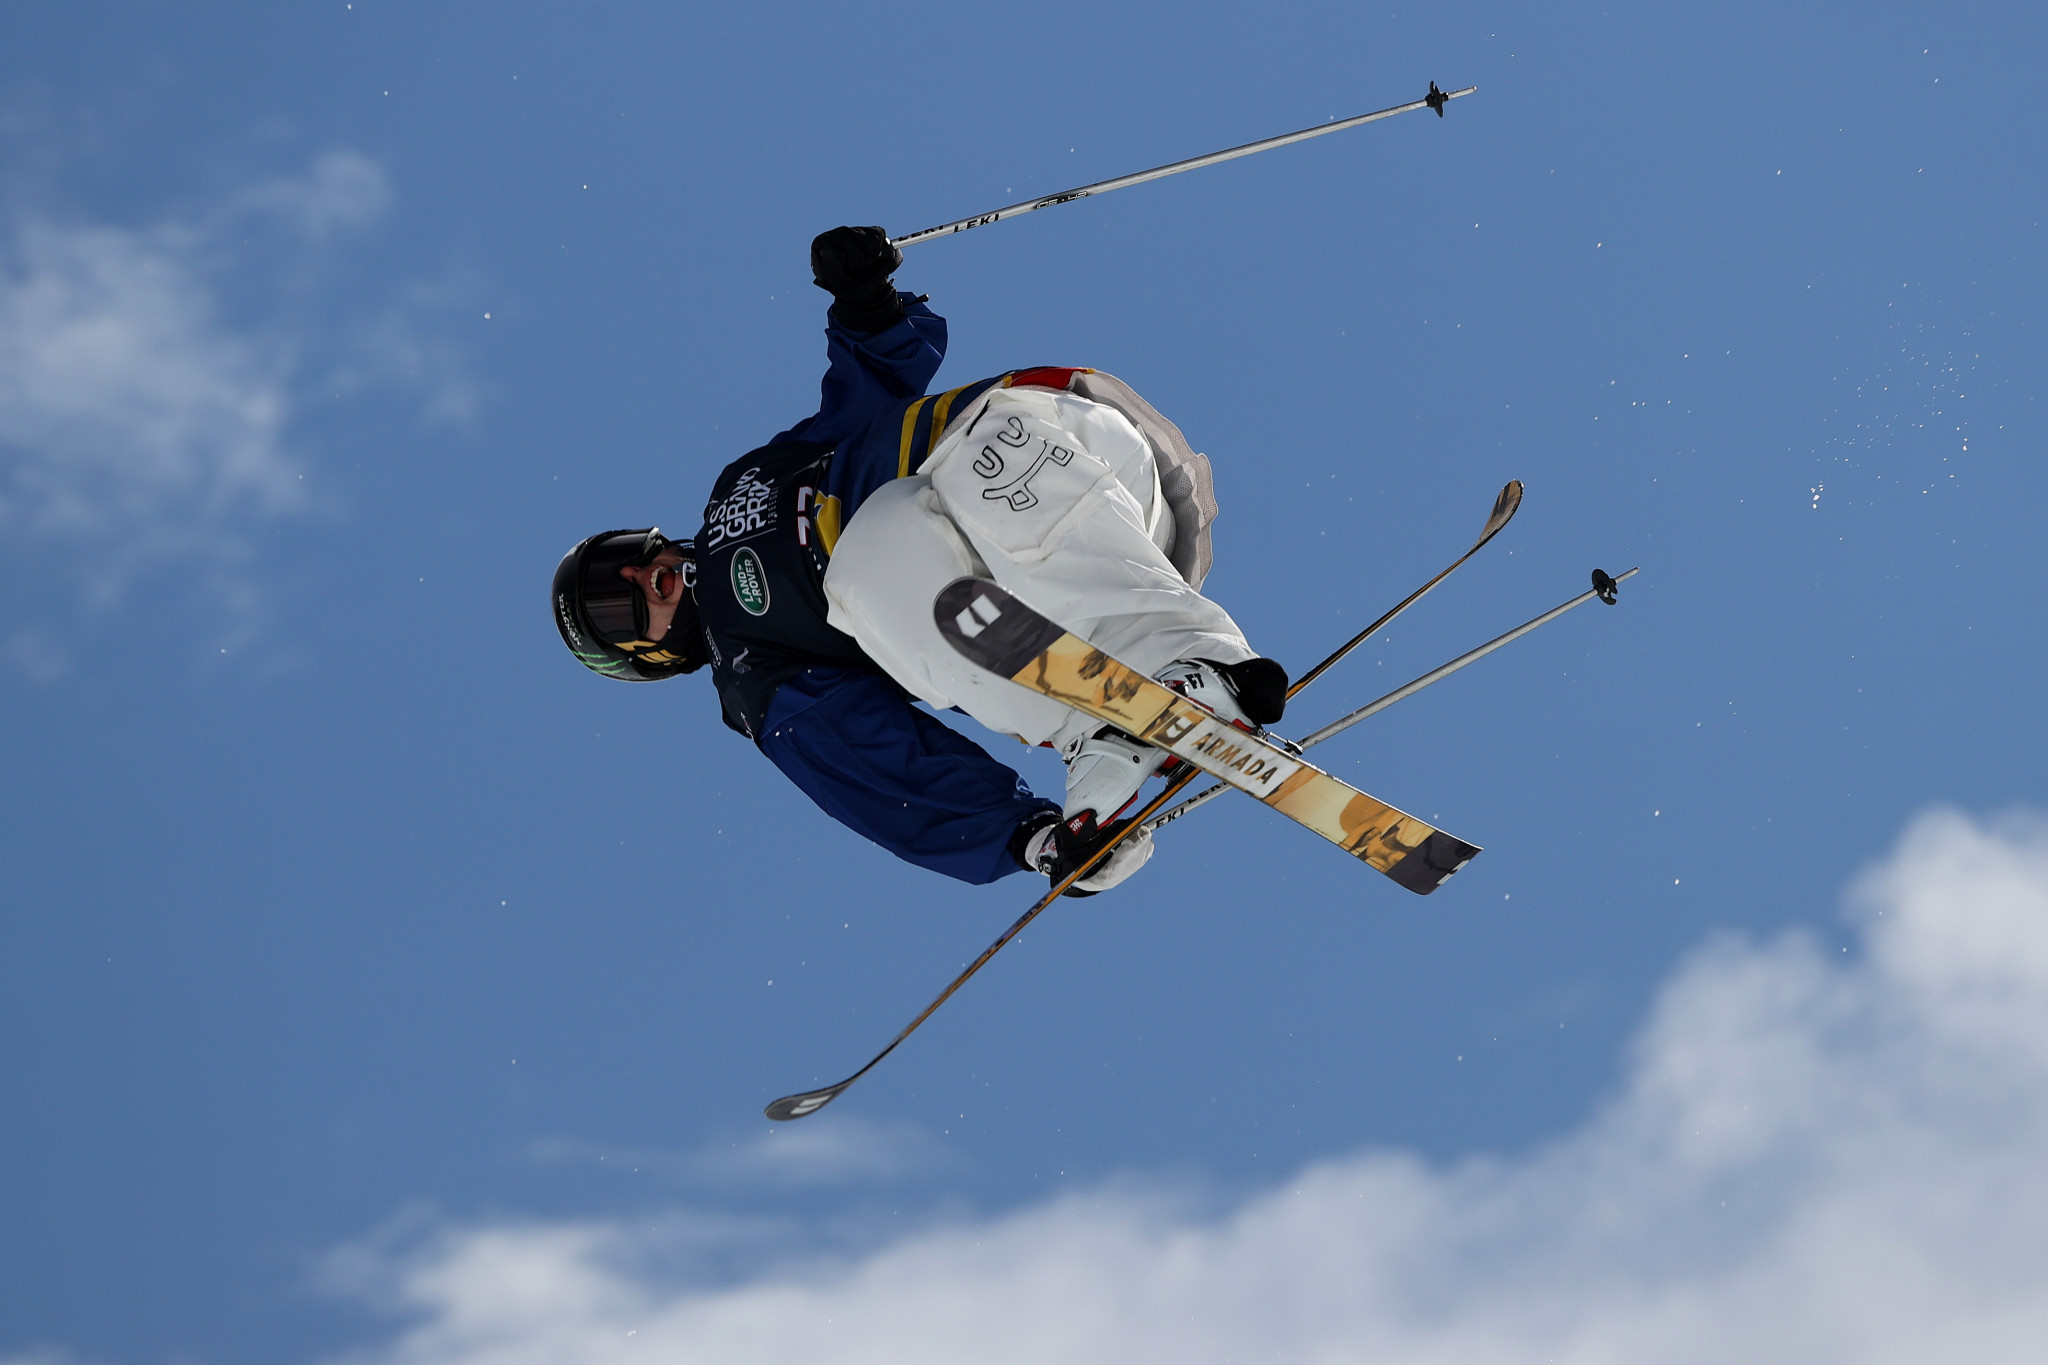 Harlaut impresses in big air qualifying at Freeski World Cup in Steamboat